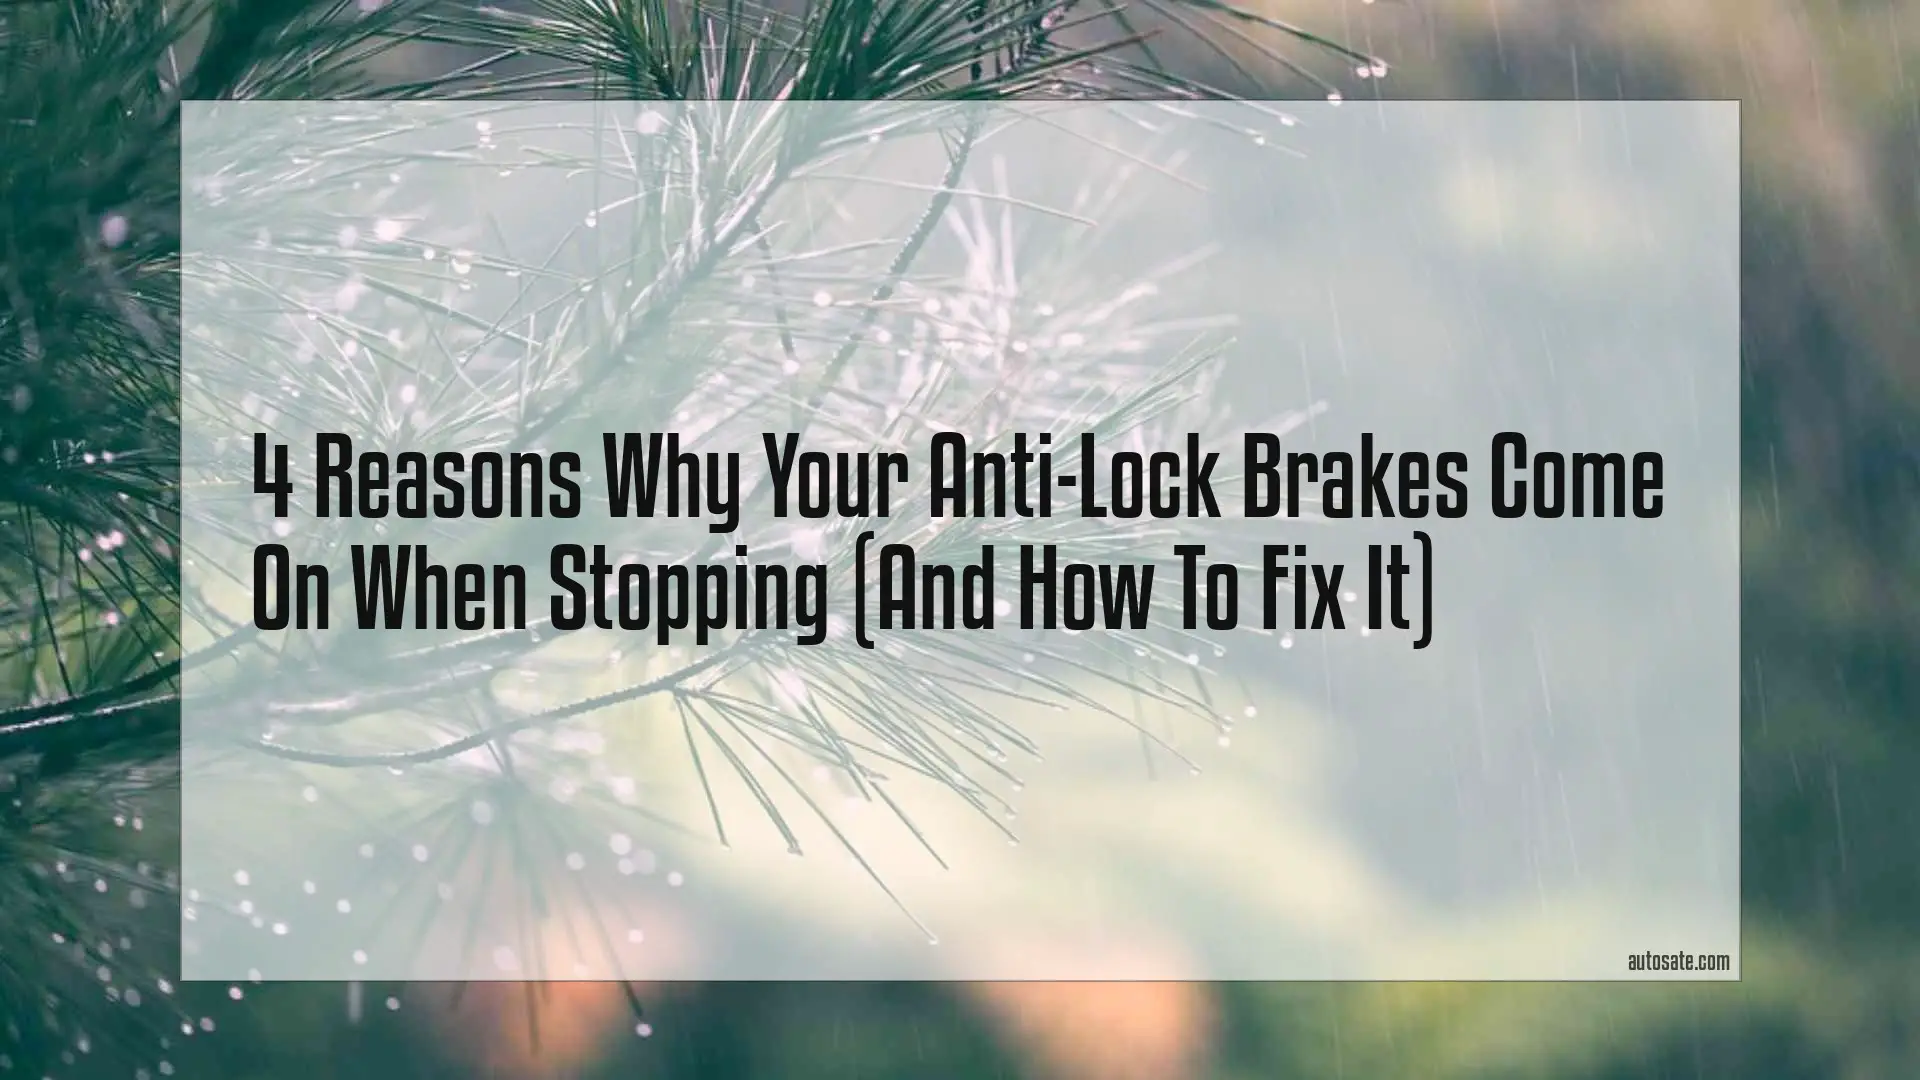 4 Reasons Why Your Anti-Lock Brakes Come On When Stopping (And How To Fix It)